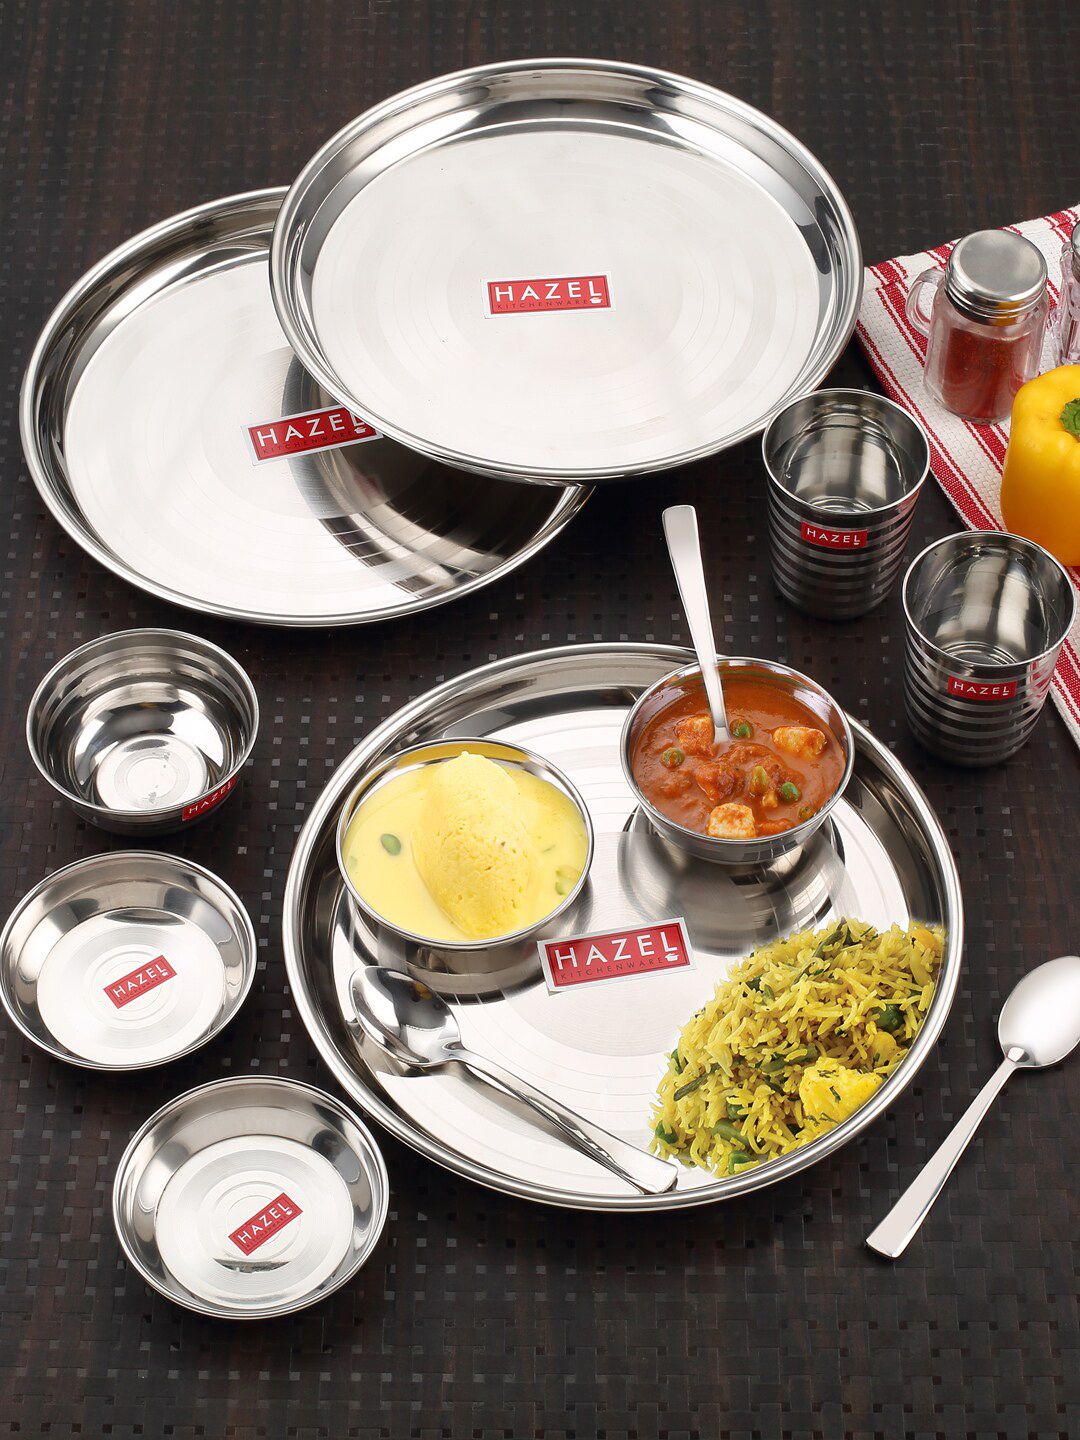 HAZEL Set Of 6 Textured Stainless Steel Glossy Dinner Set Price in India